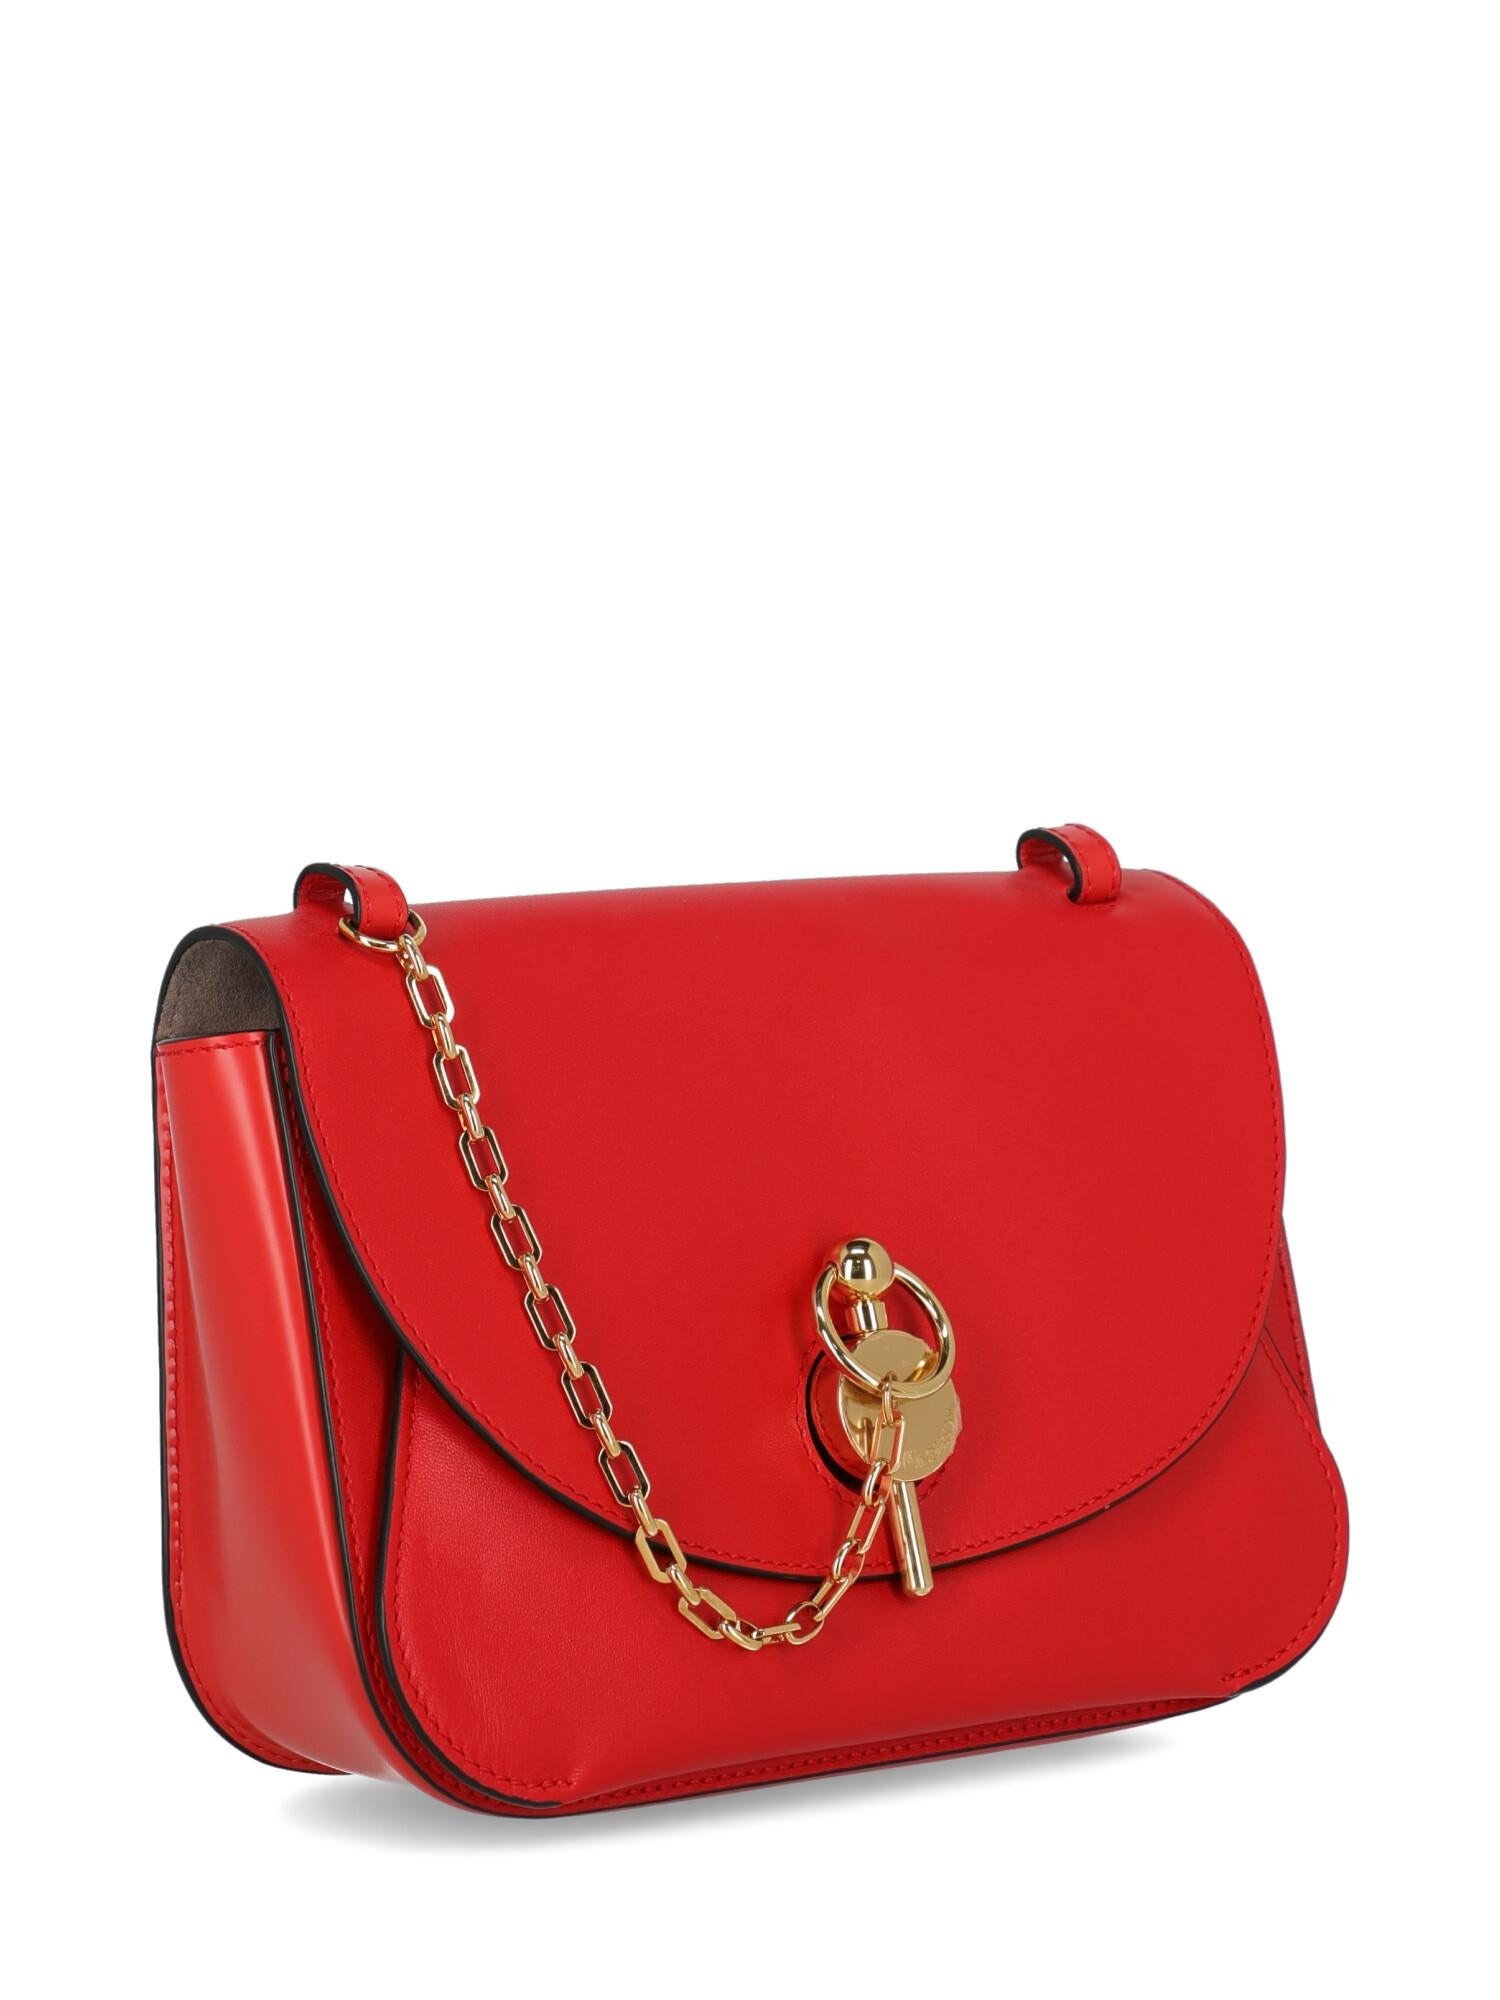 J. W. Anderson Woman Shoulder bag  Red Leather In Excellent Condition For Sale In Milan, IT